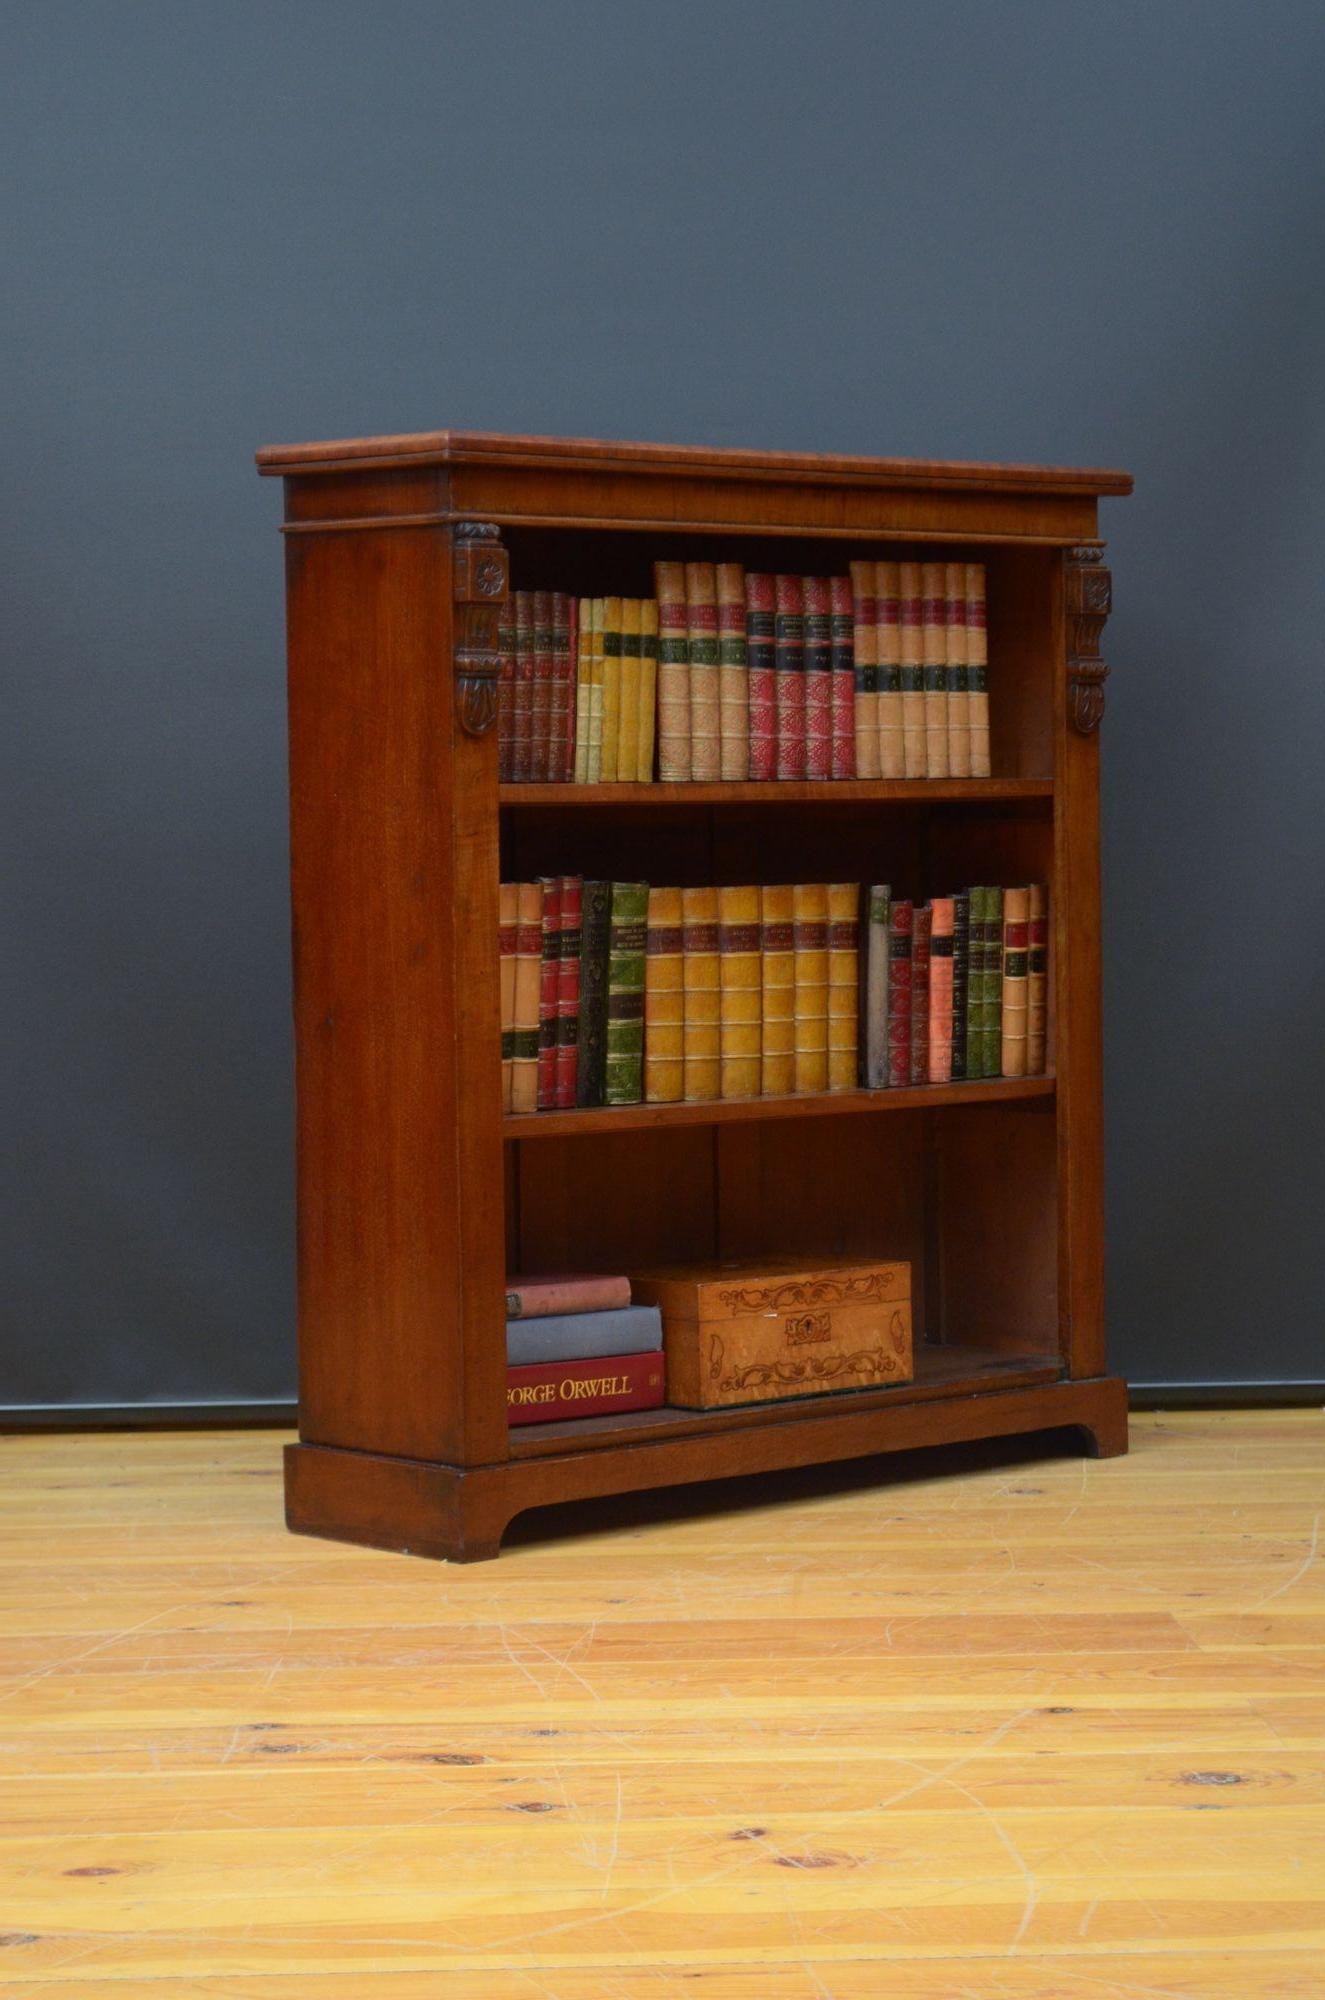 K0301 Victorian open bookcase in figured mahogany, having figured mahogany sides and figured mahogany top with moulded edge above two height adjustable shelves flanked by drop carvings, all standing on shaped plinth base. This antique bookcase is in